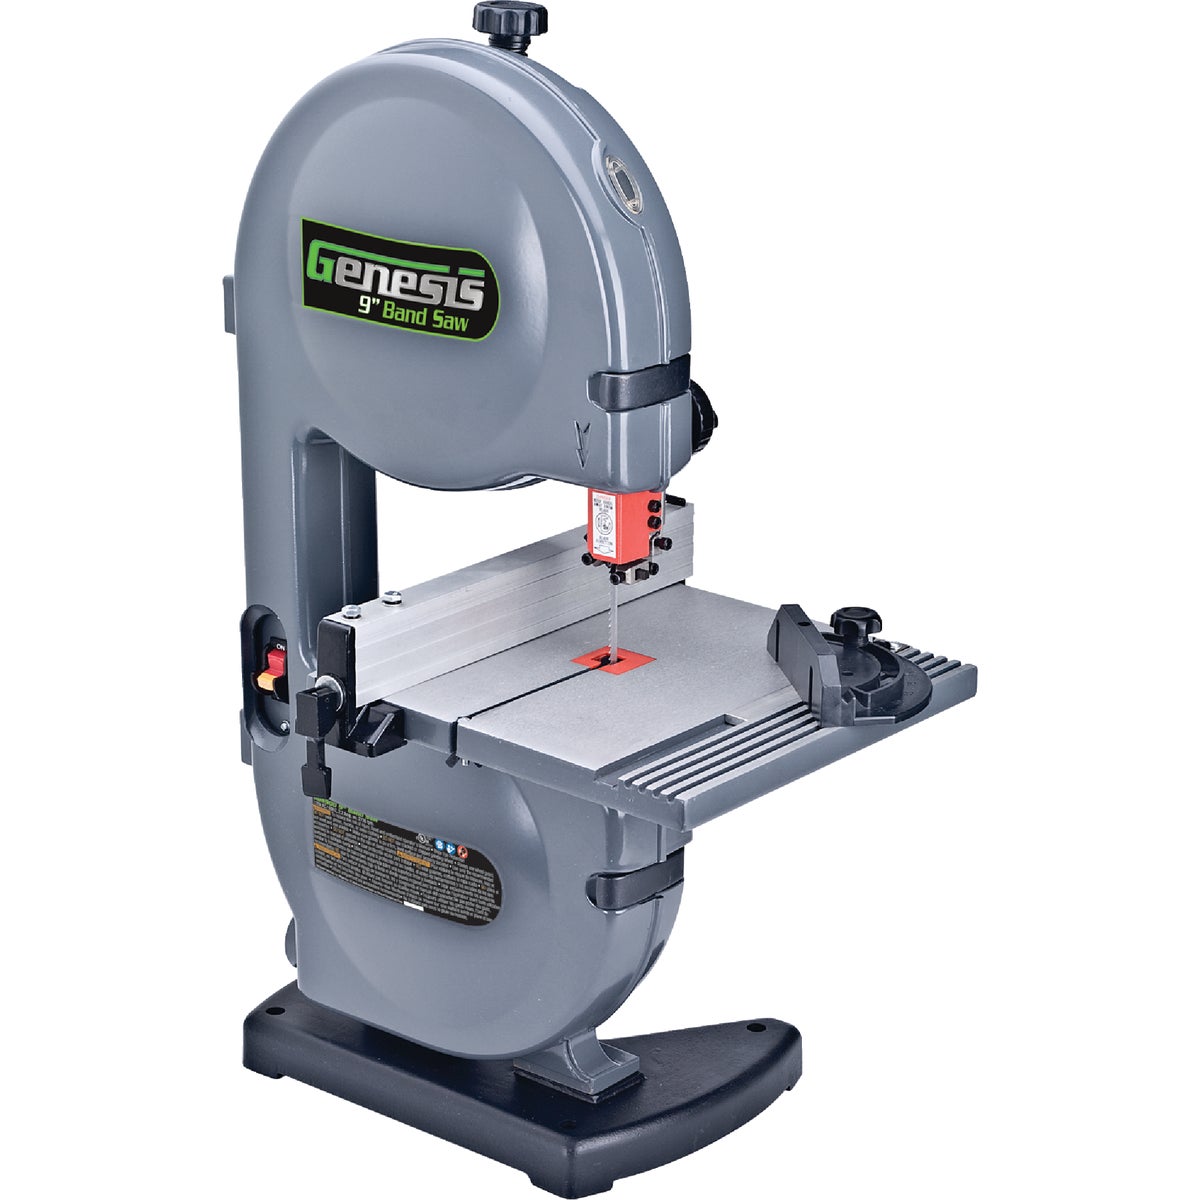  Genesis 9 In. 2.2-Amp Band Saw